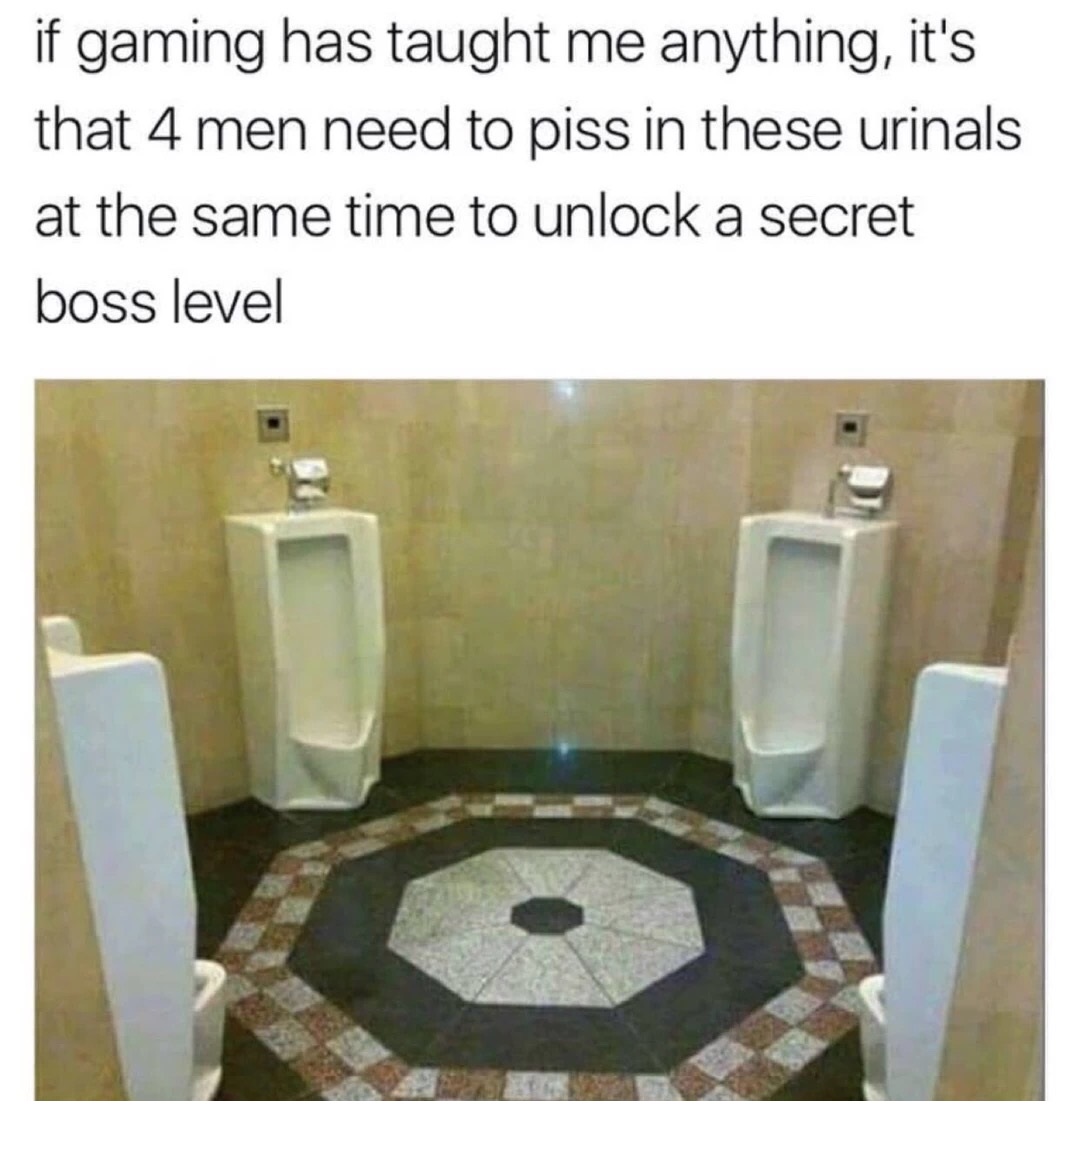 meme - cursed images of toilets - if gaming has taught me anything, it's that 4 men need to piss in these urinals at the same time to unlock a secret boss level